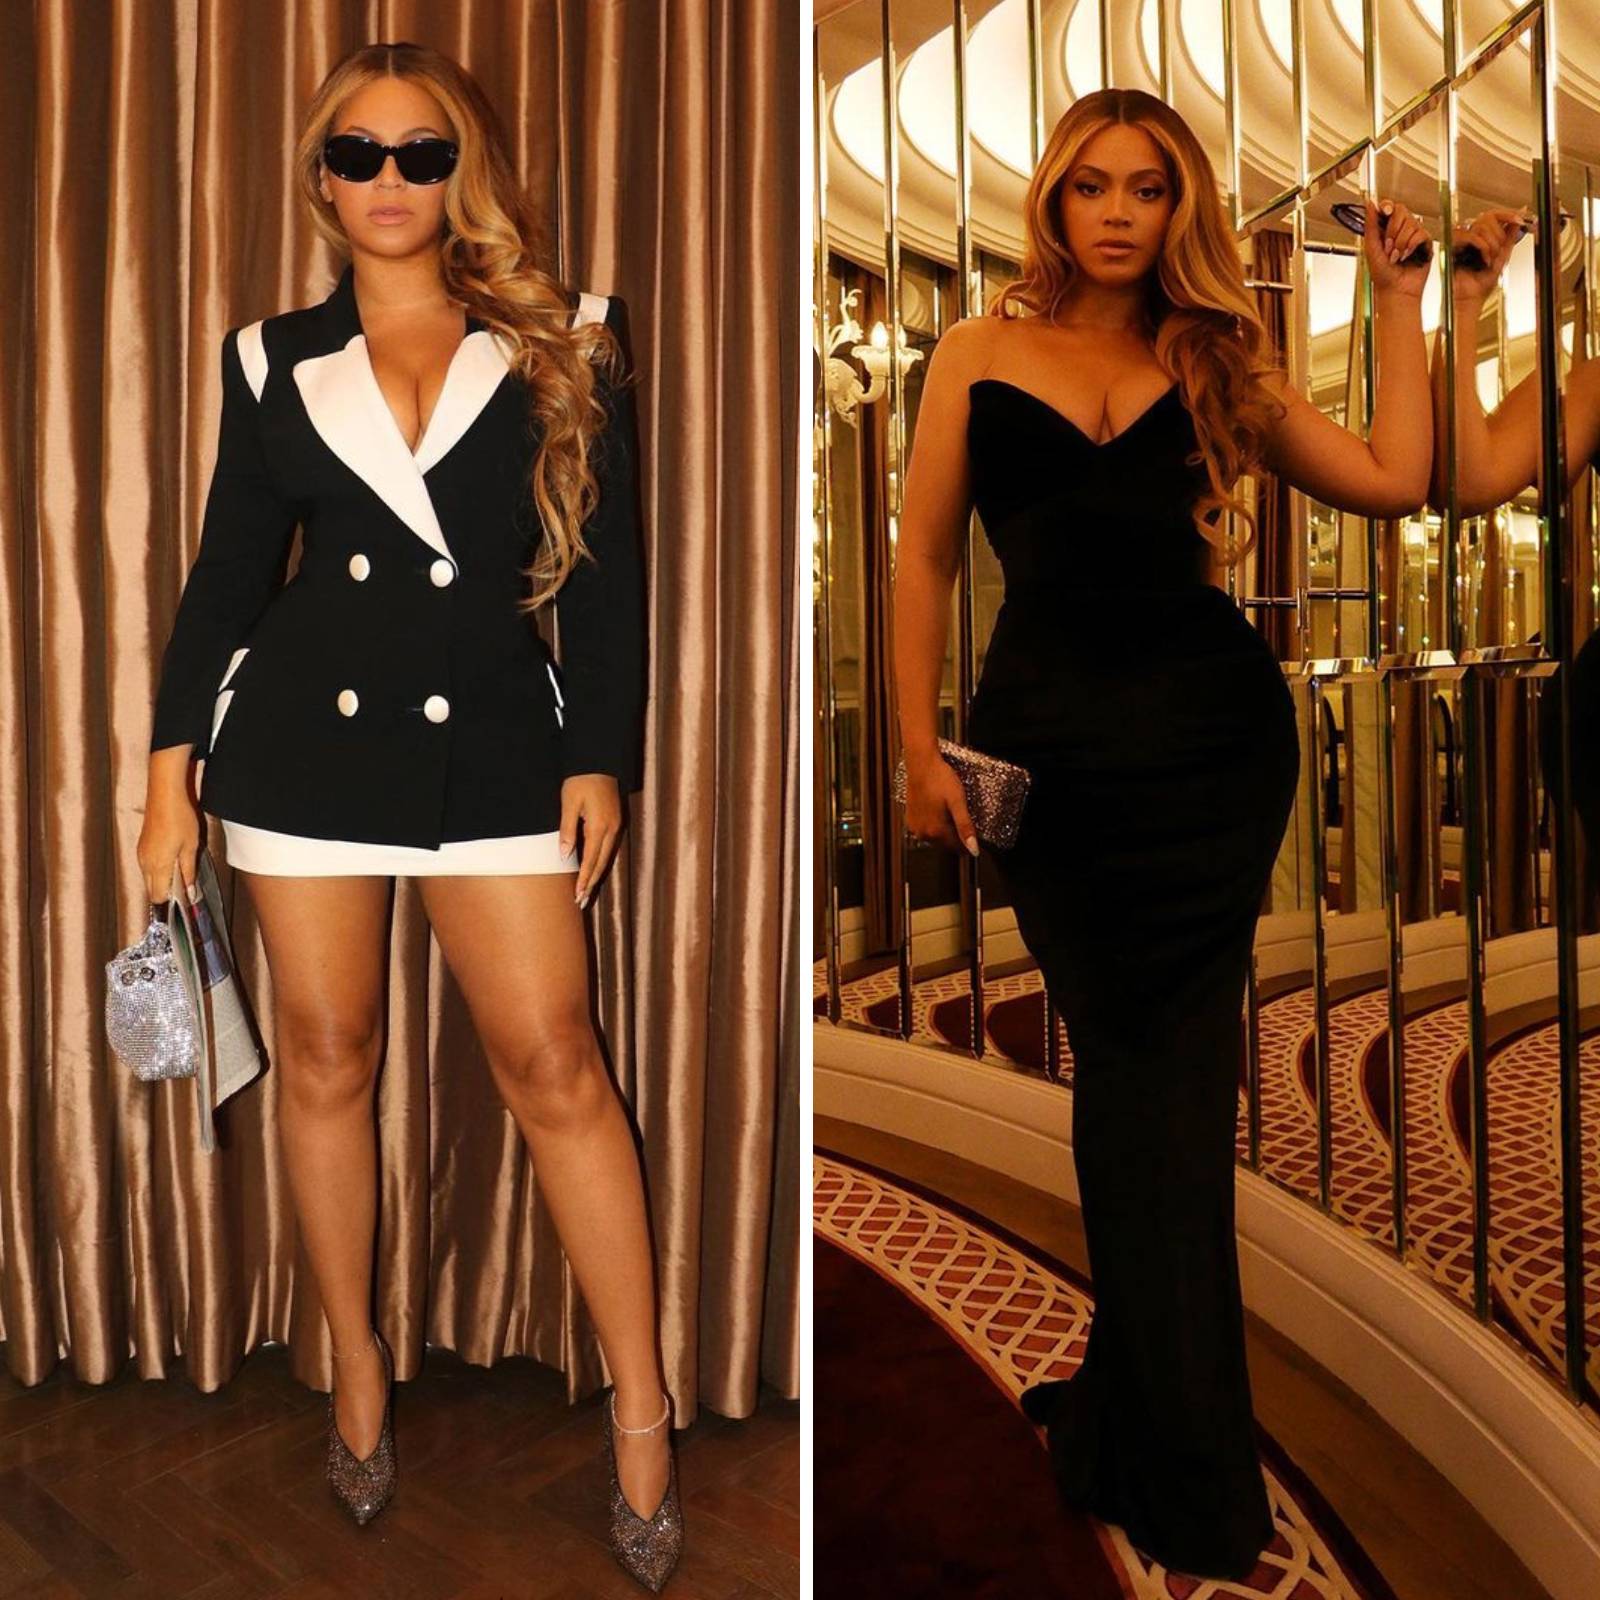 Beyonce Is The Queen Of Power Dressing And These Instagram Pictures Are  Proof, Take A Look